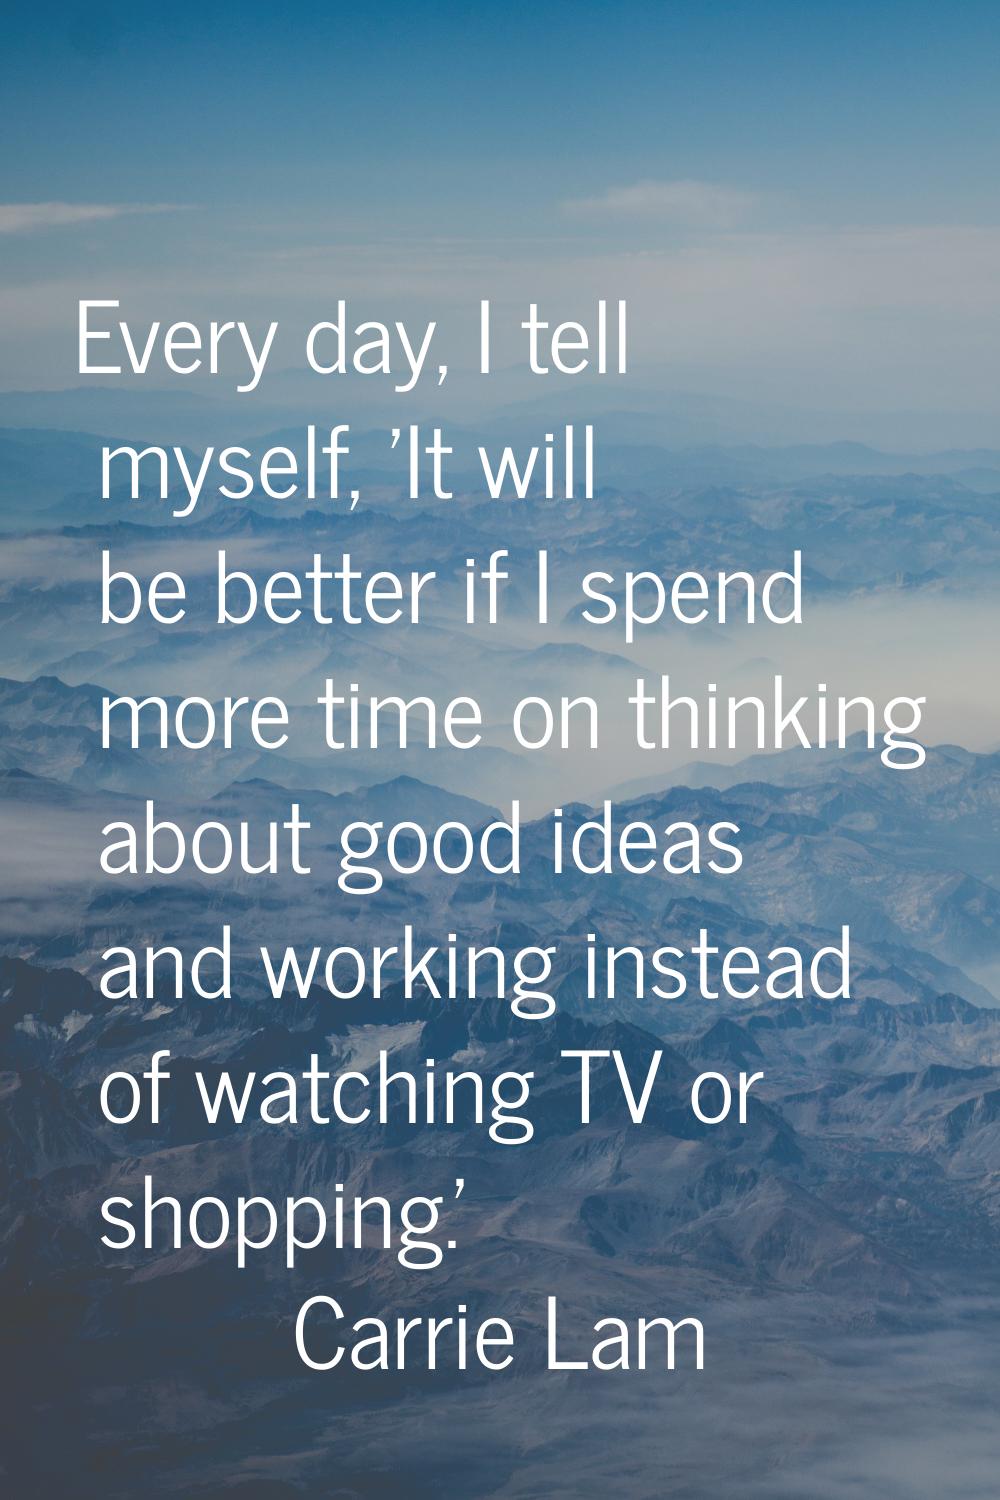 Every day, I tell myself, 'It will be better if I spend more time on thinking about good ideas and 